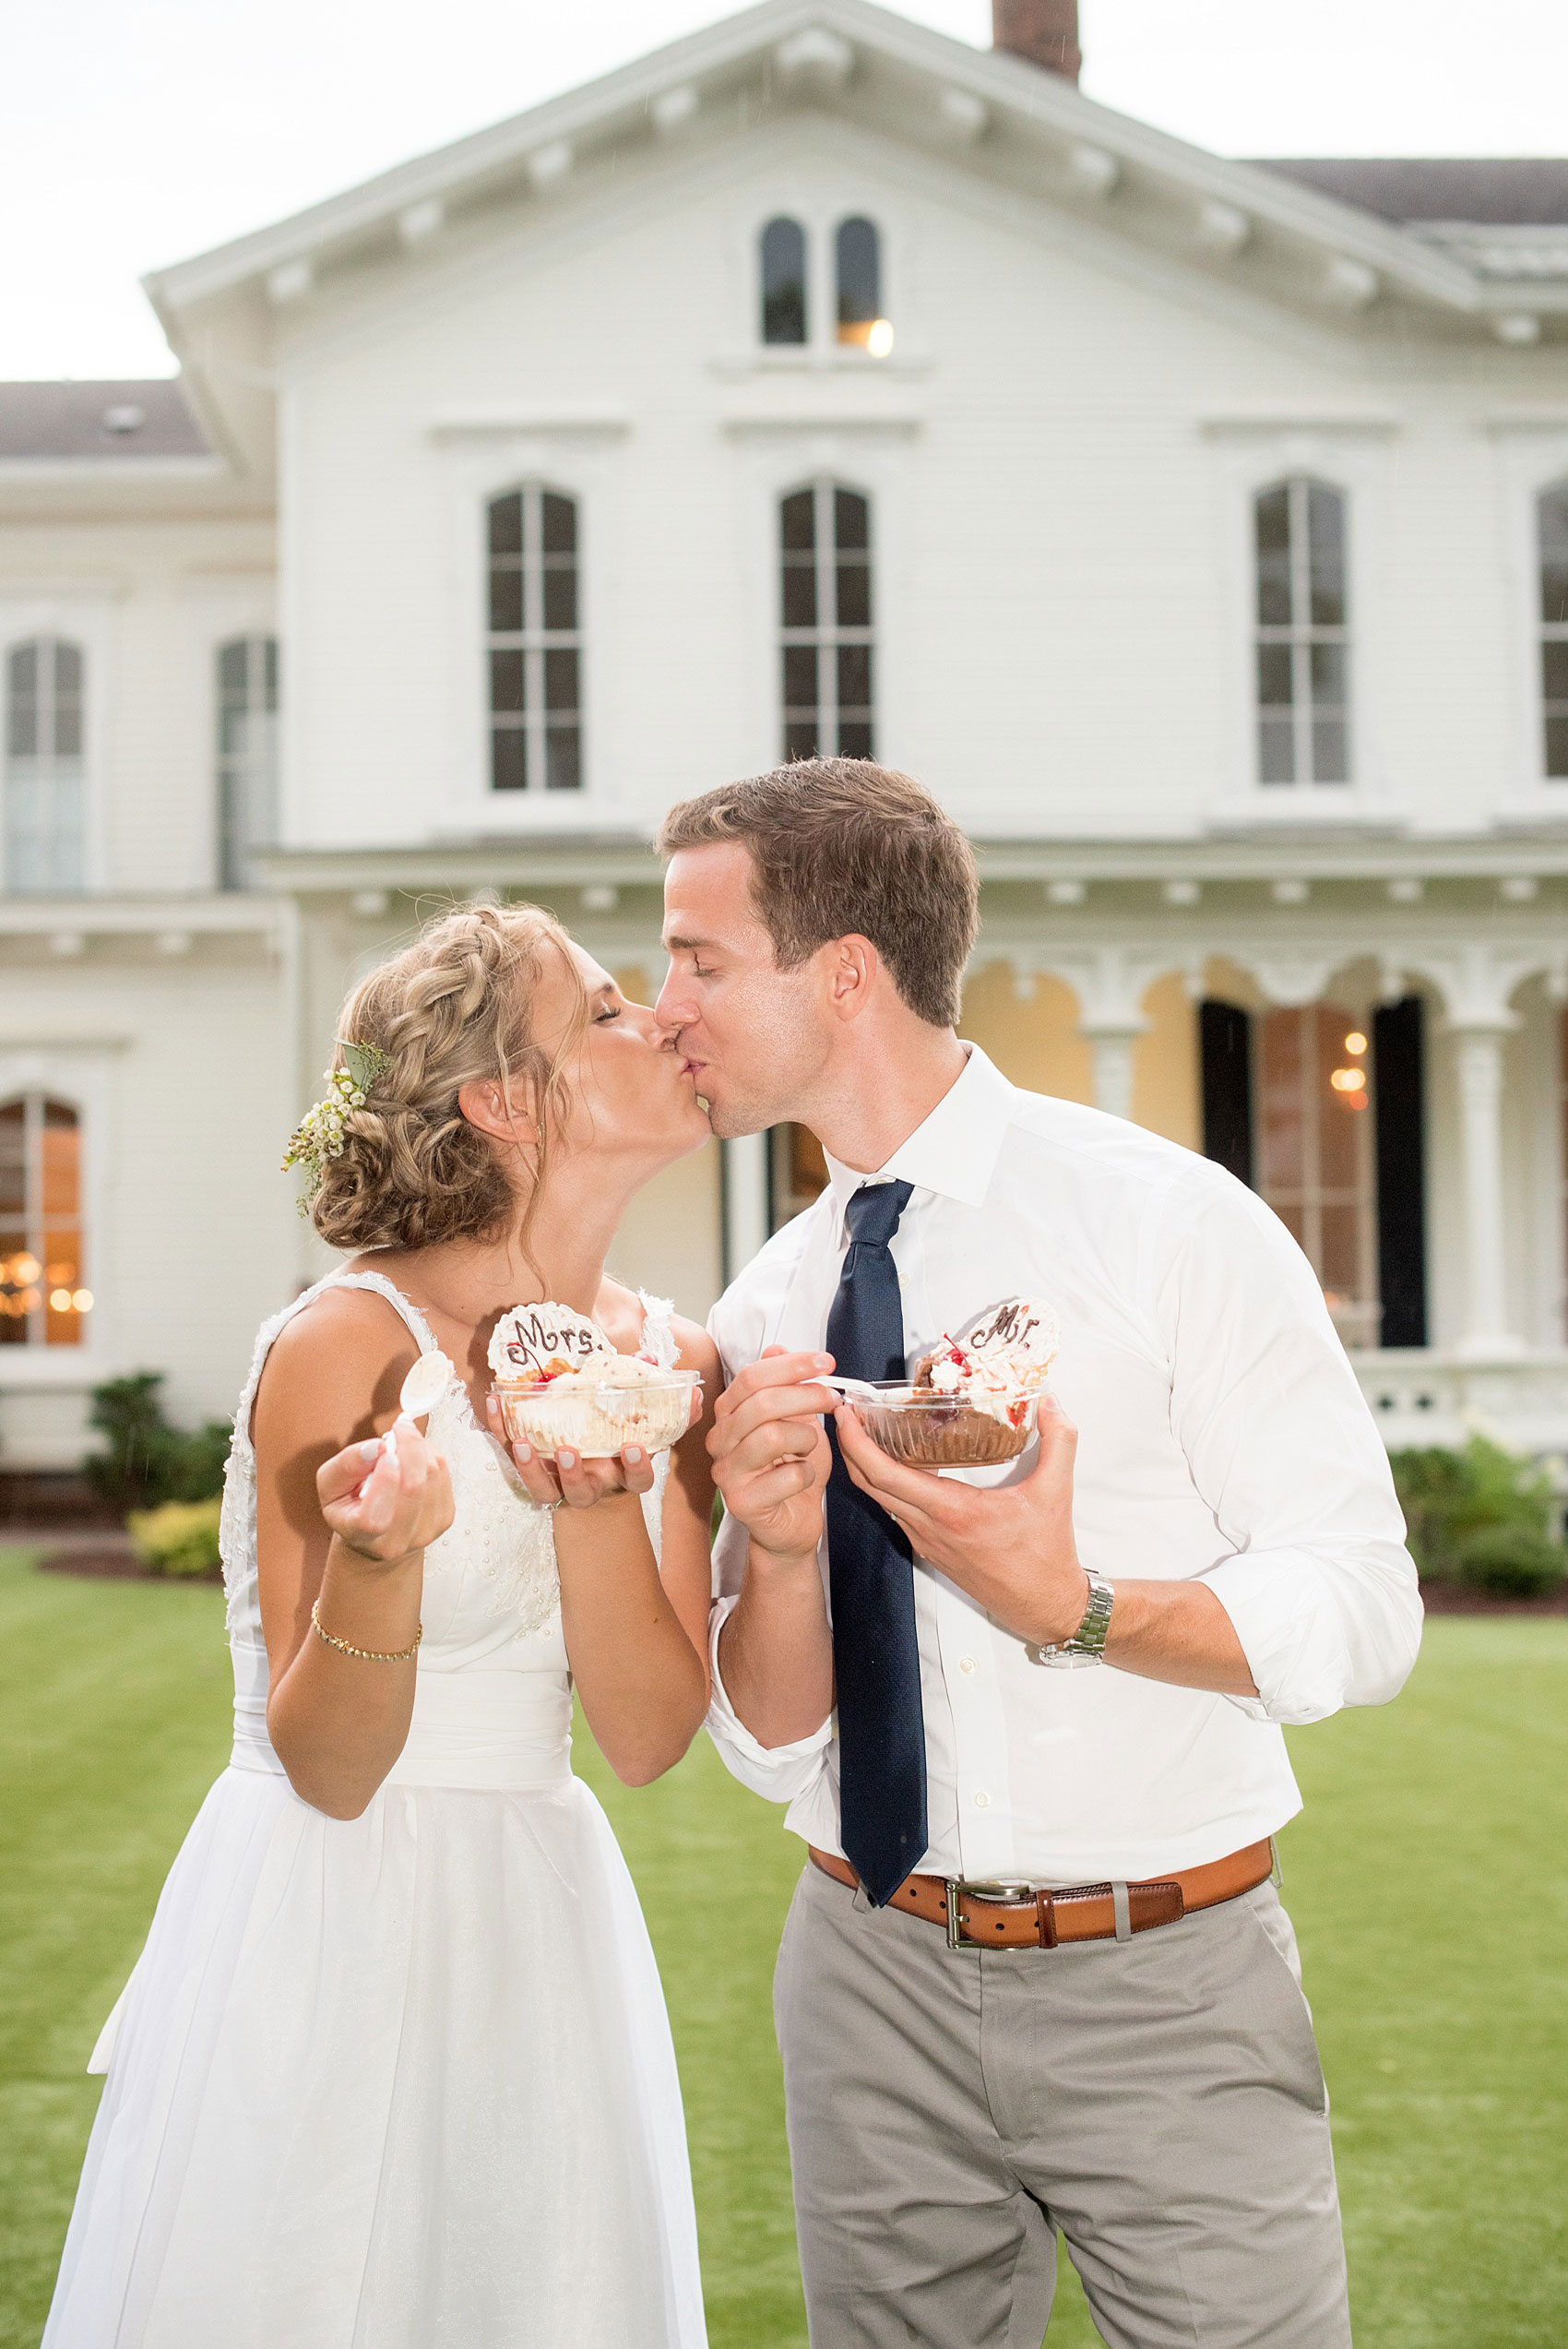 Mikkel Paige Photography wedding photos at The Merrimon-Wynne House in downtown Raleigh. A picture of the bride and groom with custom Mr. and Mrs. waffle cones from The Freezing Point ice cream bar.